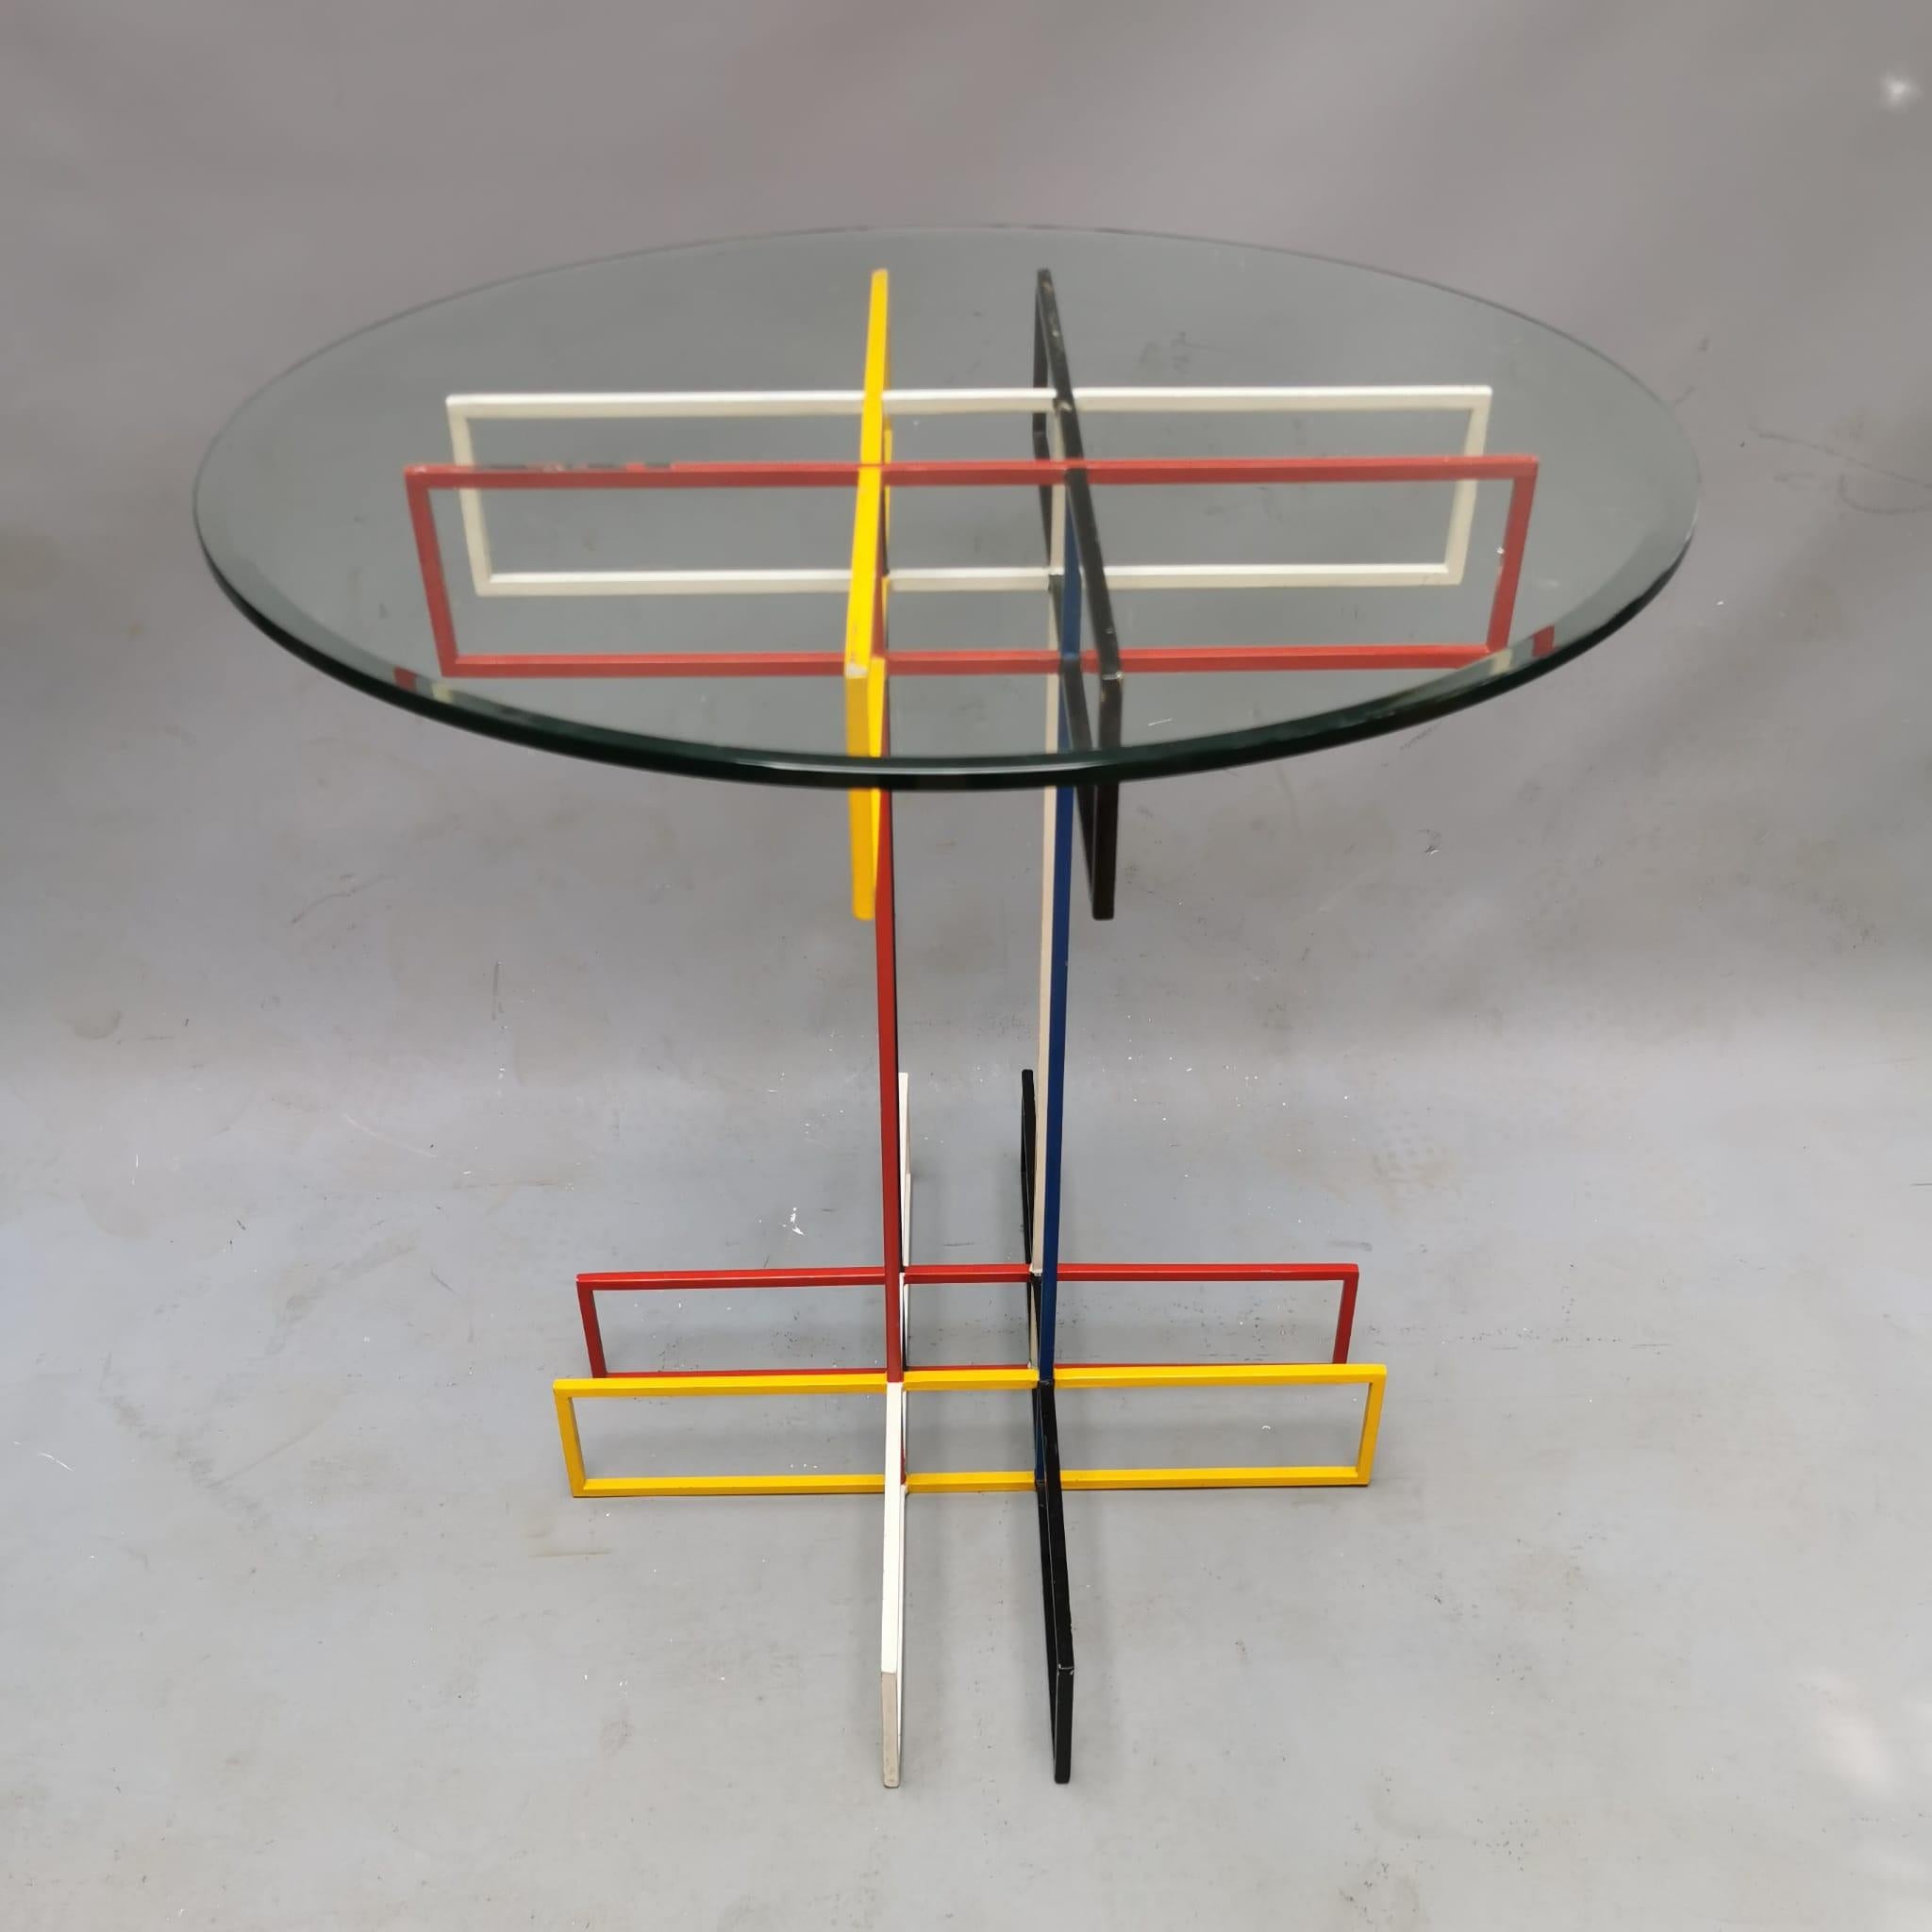 A table inspired by the artistic work of Piet Mondrian, with these slender metal legs colored in red, yellow, blue and black. A clear reference to the work of the Dutch artist, this table fits as a unique object within a home. Intriguing and